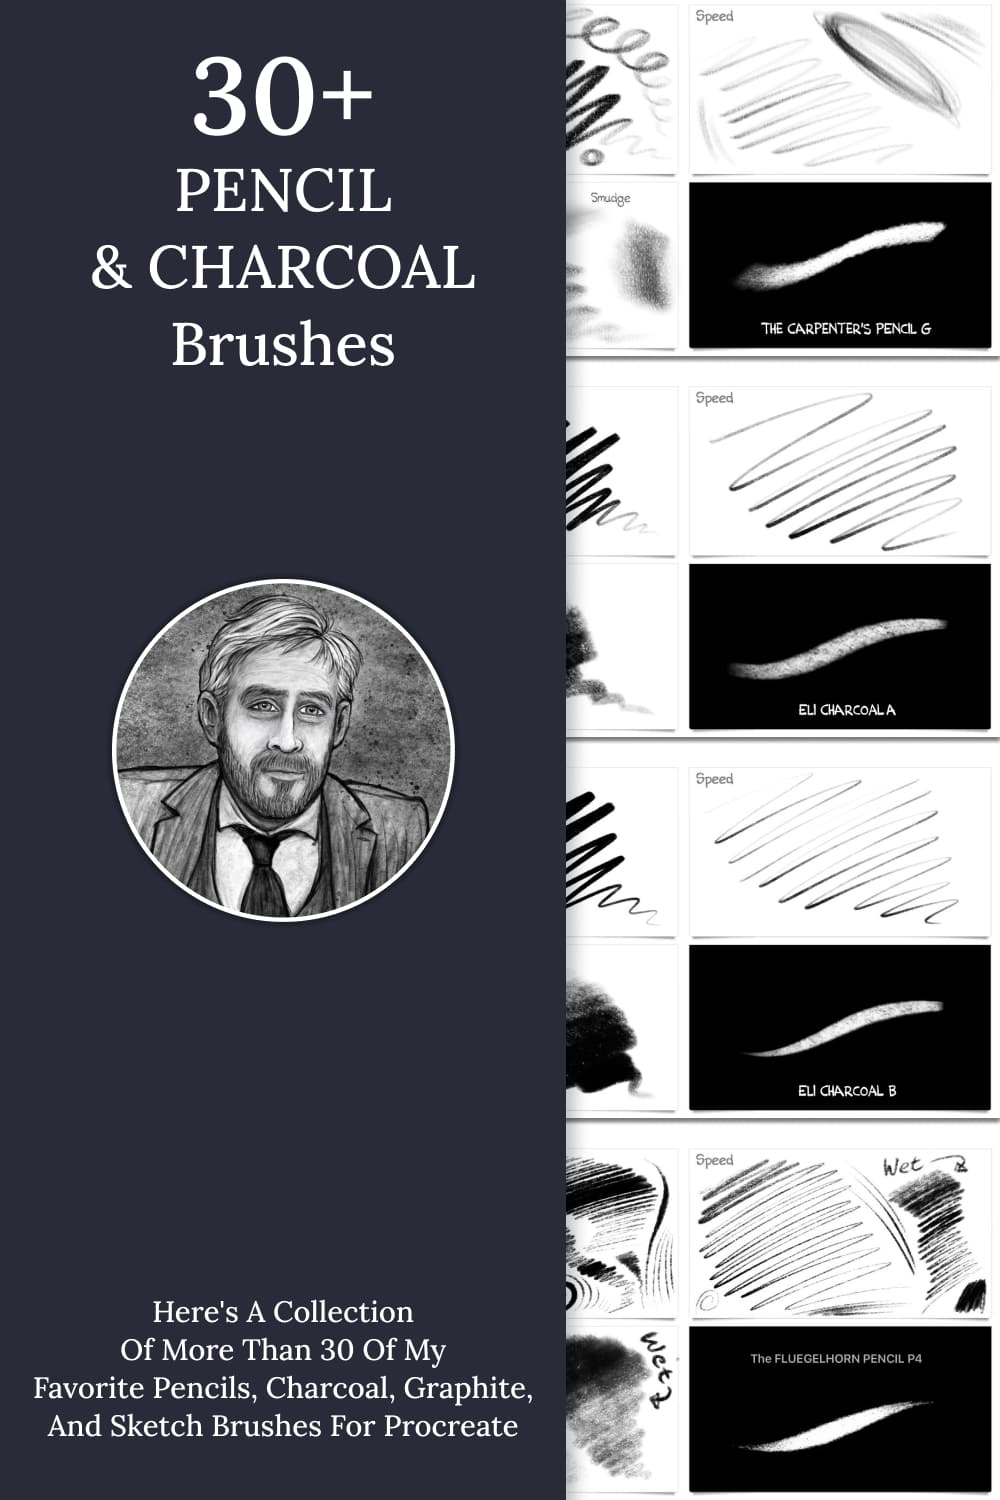 30 pencil charcoal brushes, 1000 by 1500 pixels.